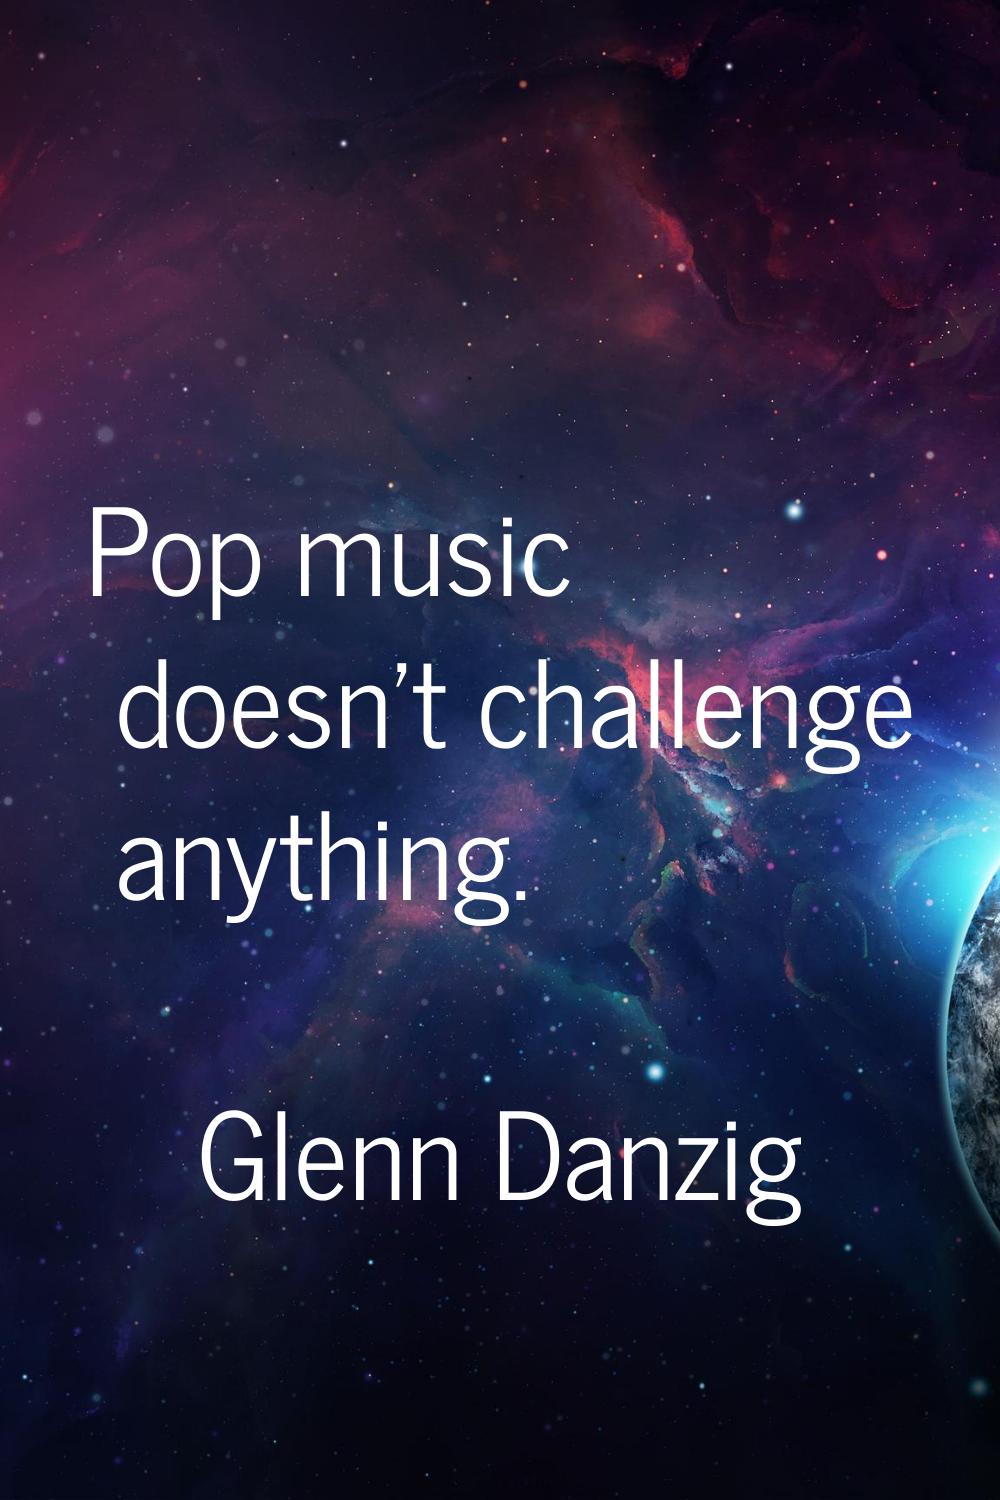 Pop music doesn't challenge anything.